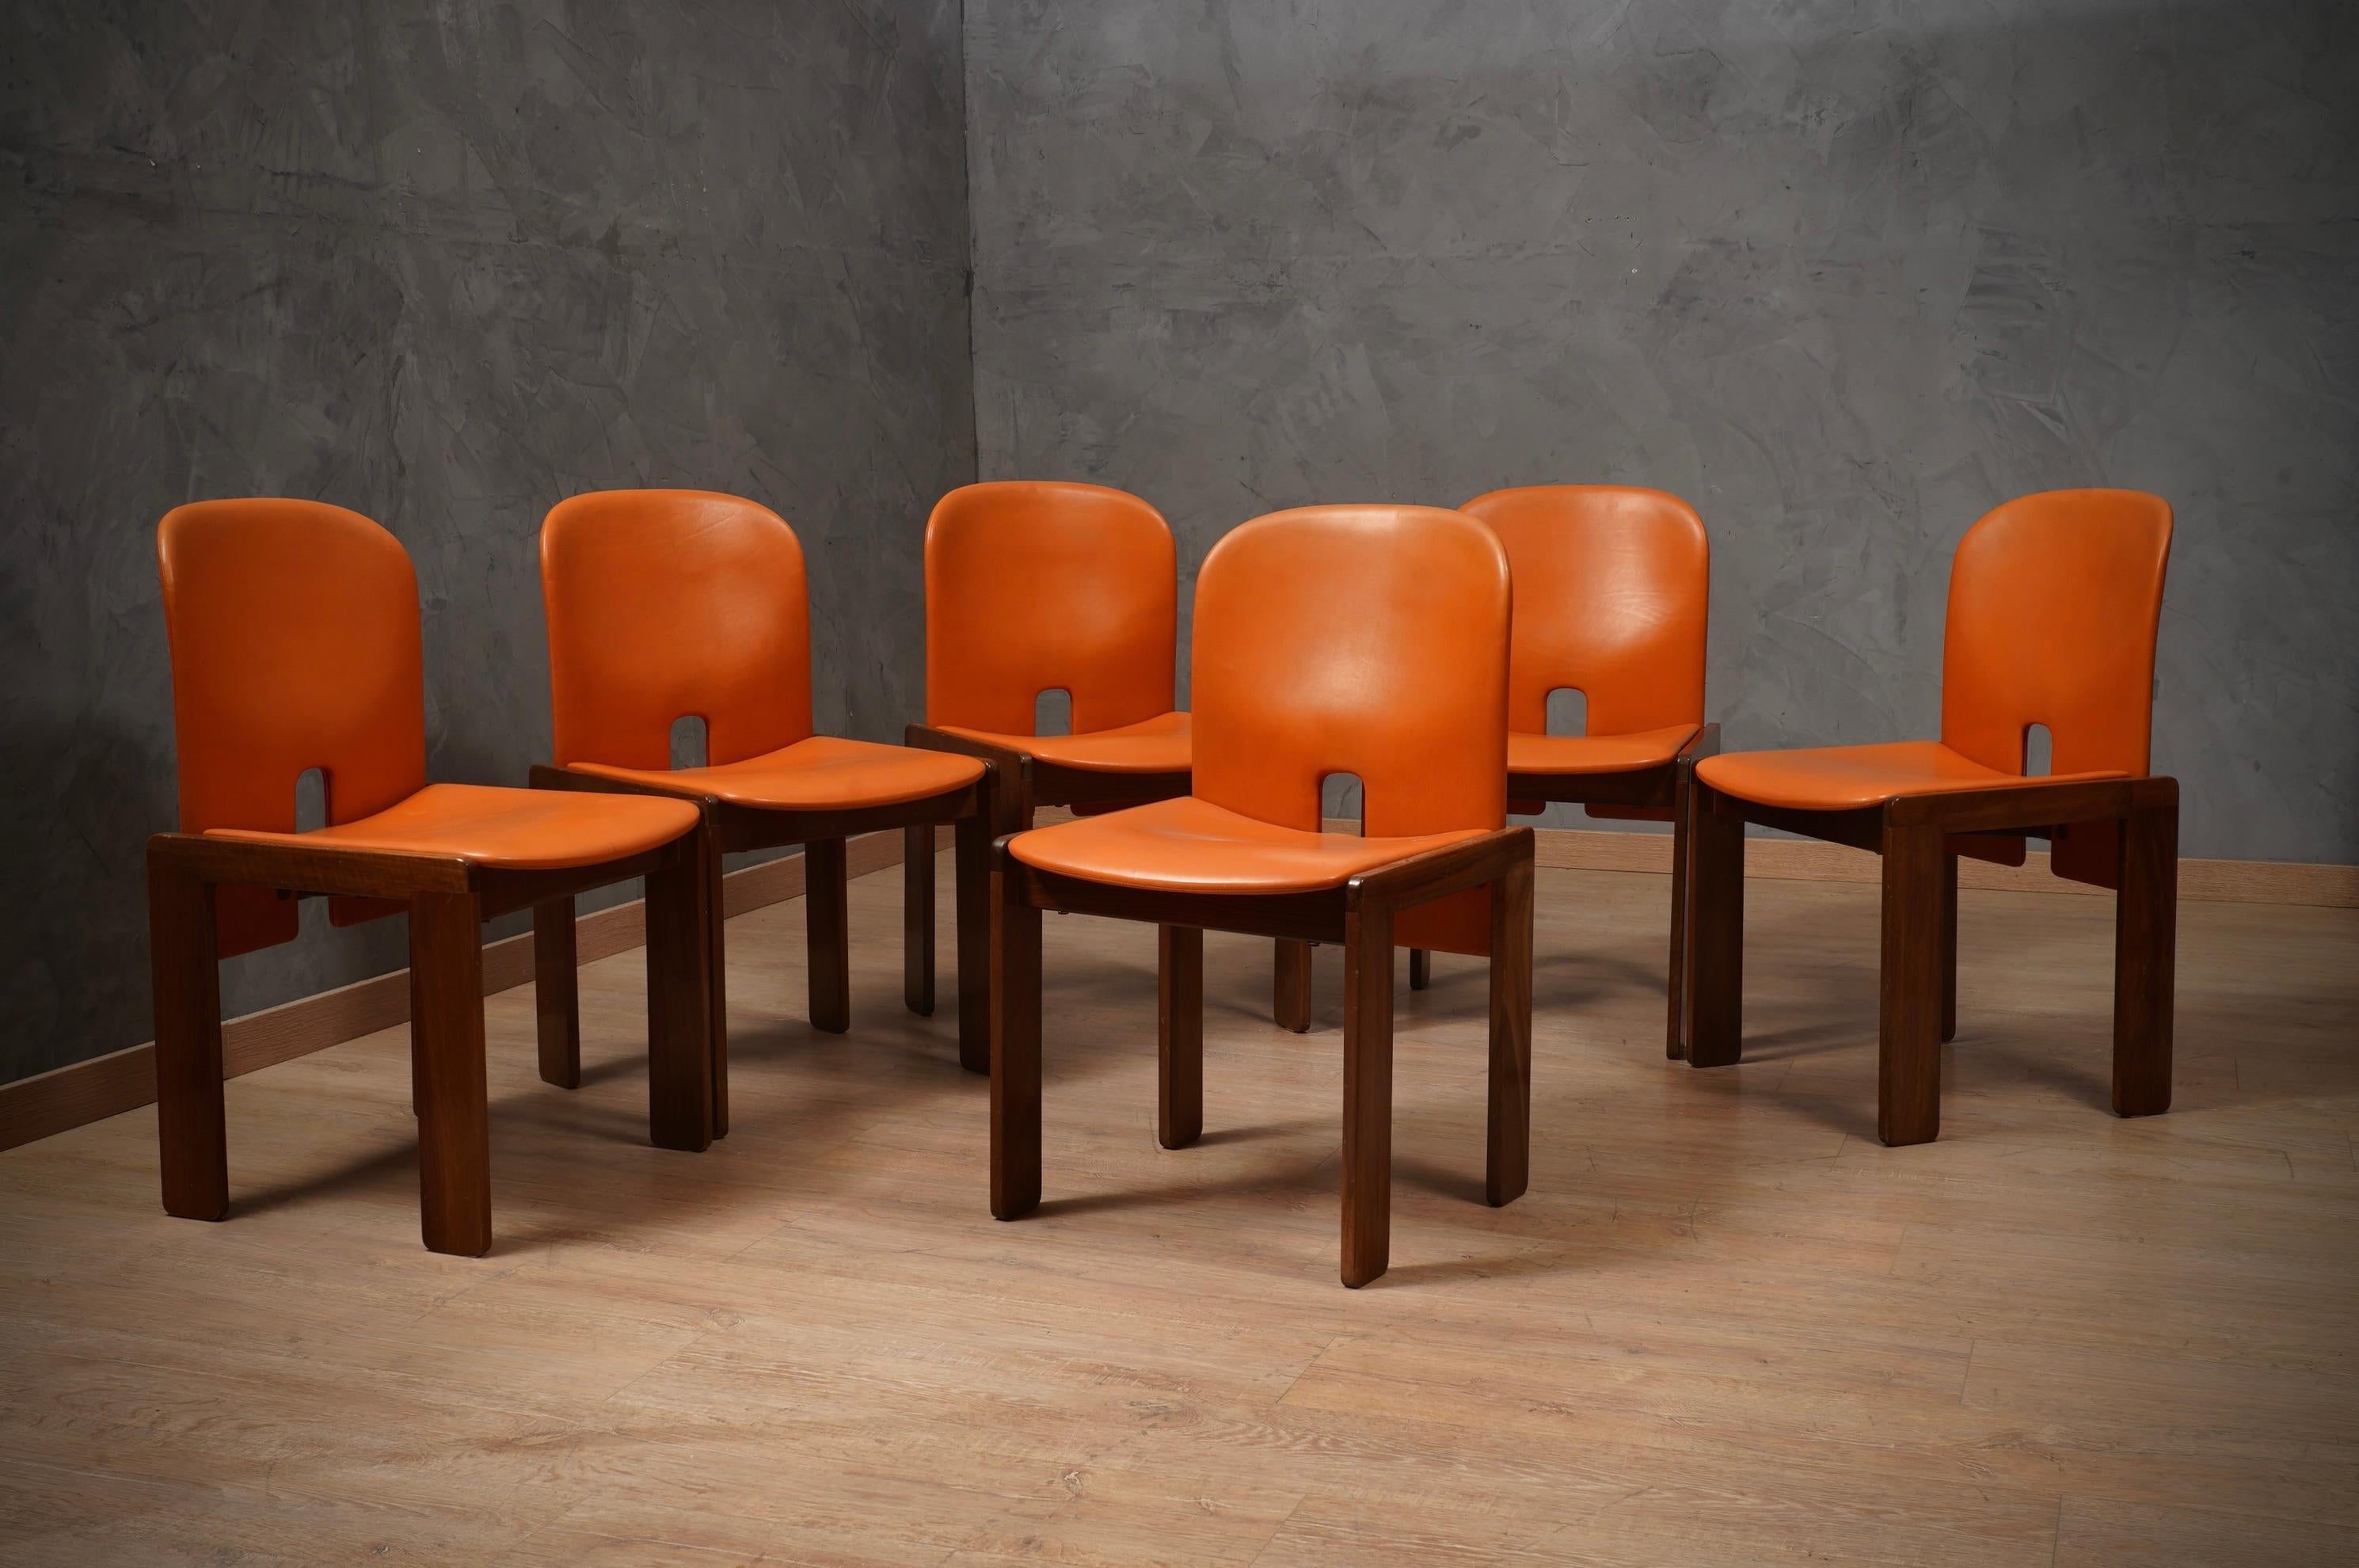 Exciting Italian style for this group of six chairs designed by Afra and Tobia Scarpa for Cassina. Linear and clean design, but at the same time amazing for the combination of materials used.

The chairs are made of walnut wood, and have a very